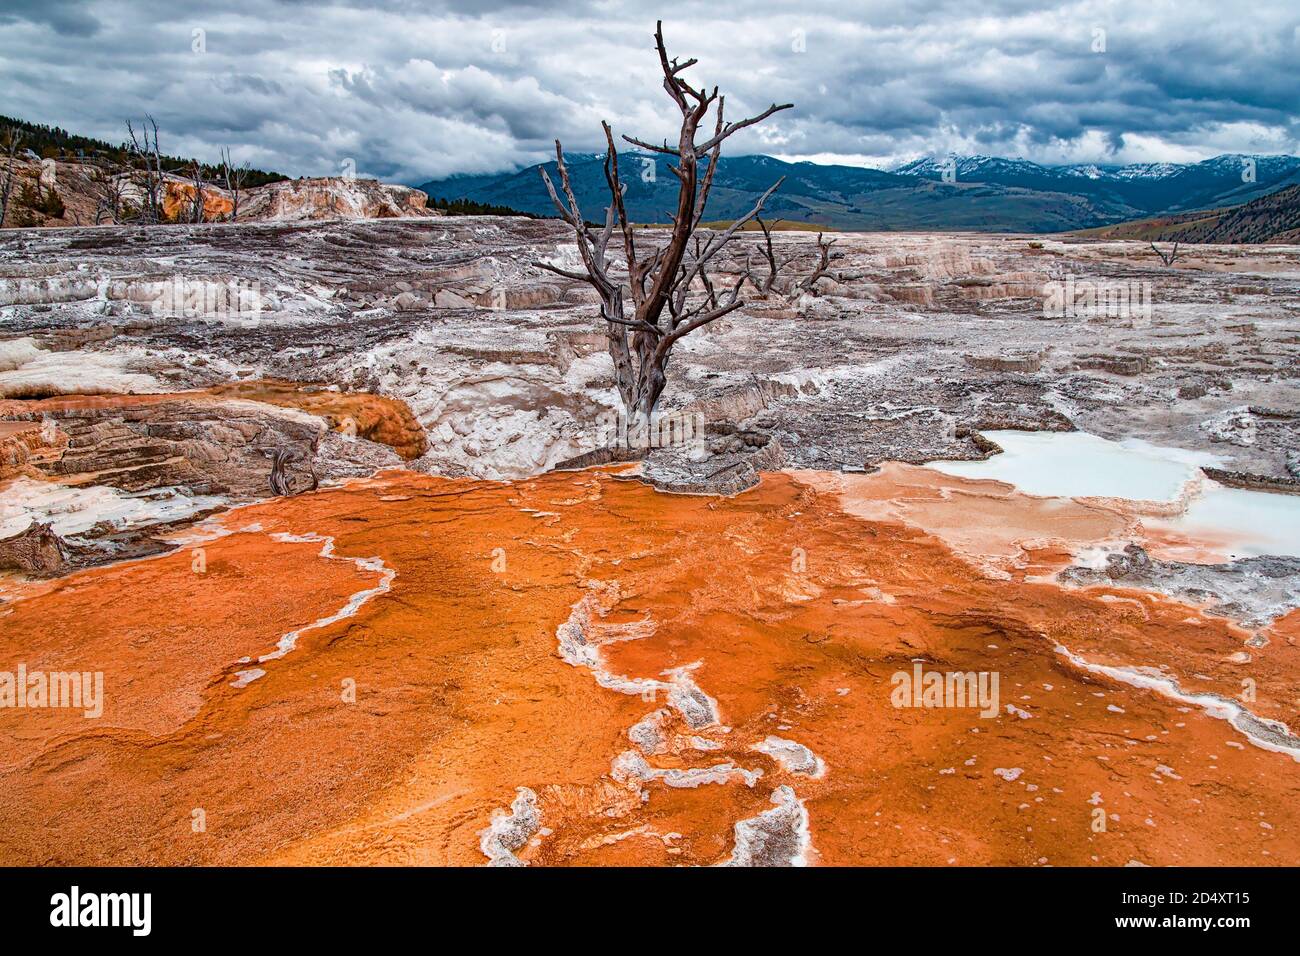 Dead tree burried in geothermal area in Mammoth Hot Springs, Yellowstone National Park, Wyoming, USA Stock Photo